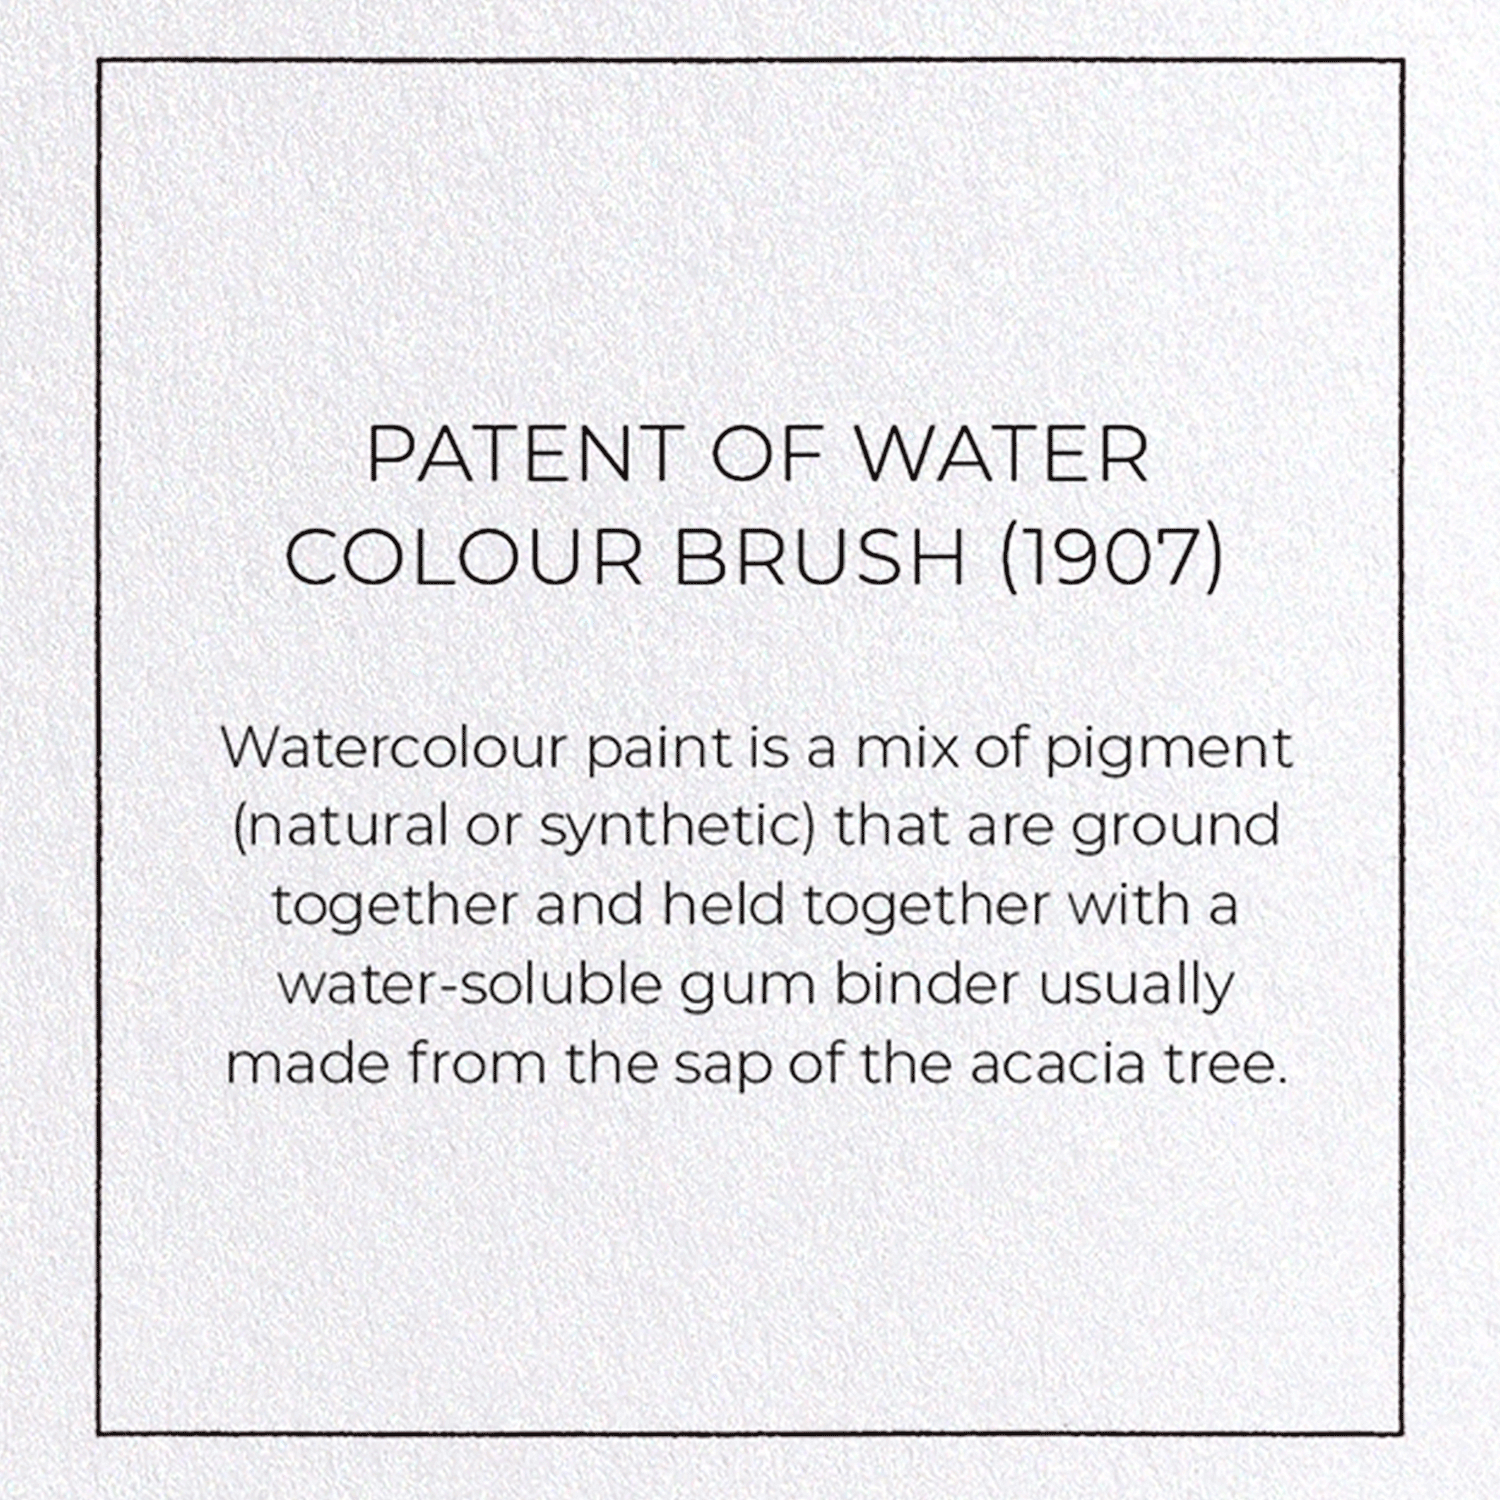 PATENT OF WATER COLOUR BRUSH (1907): Patent Greeting Card